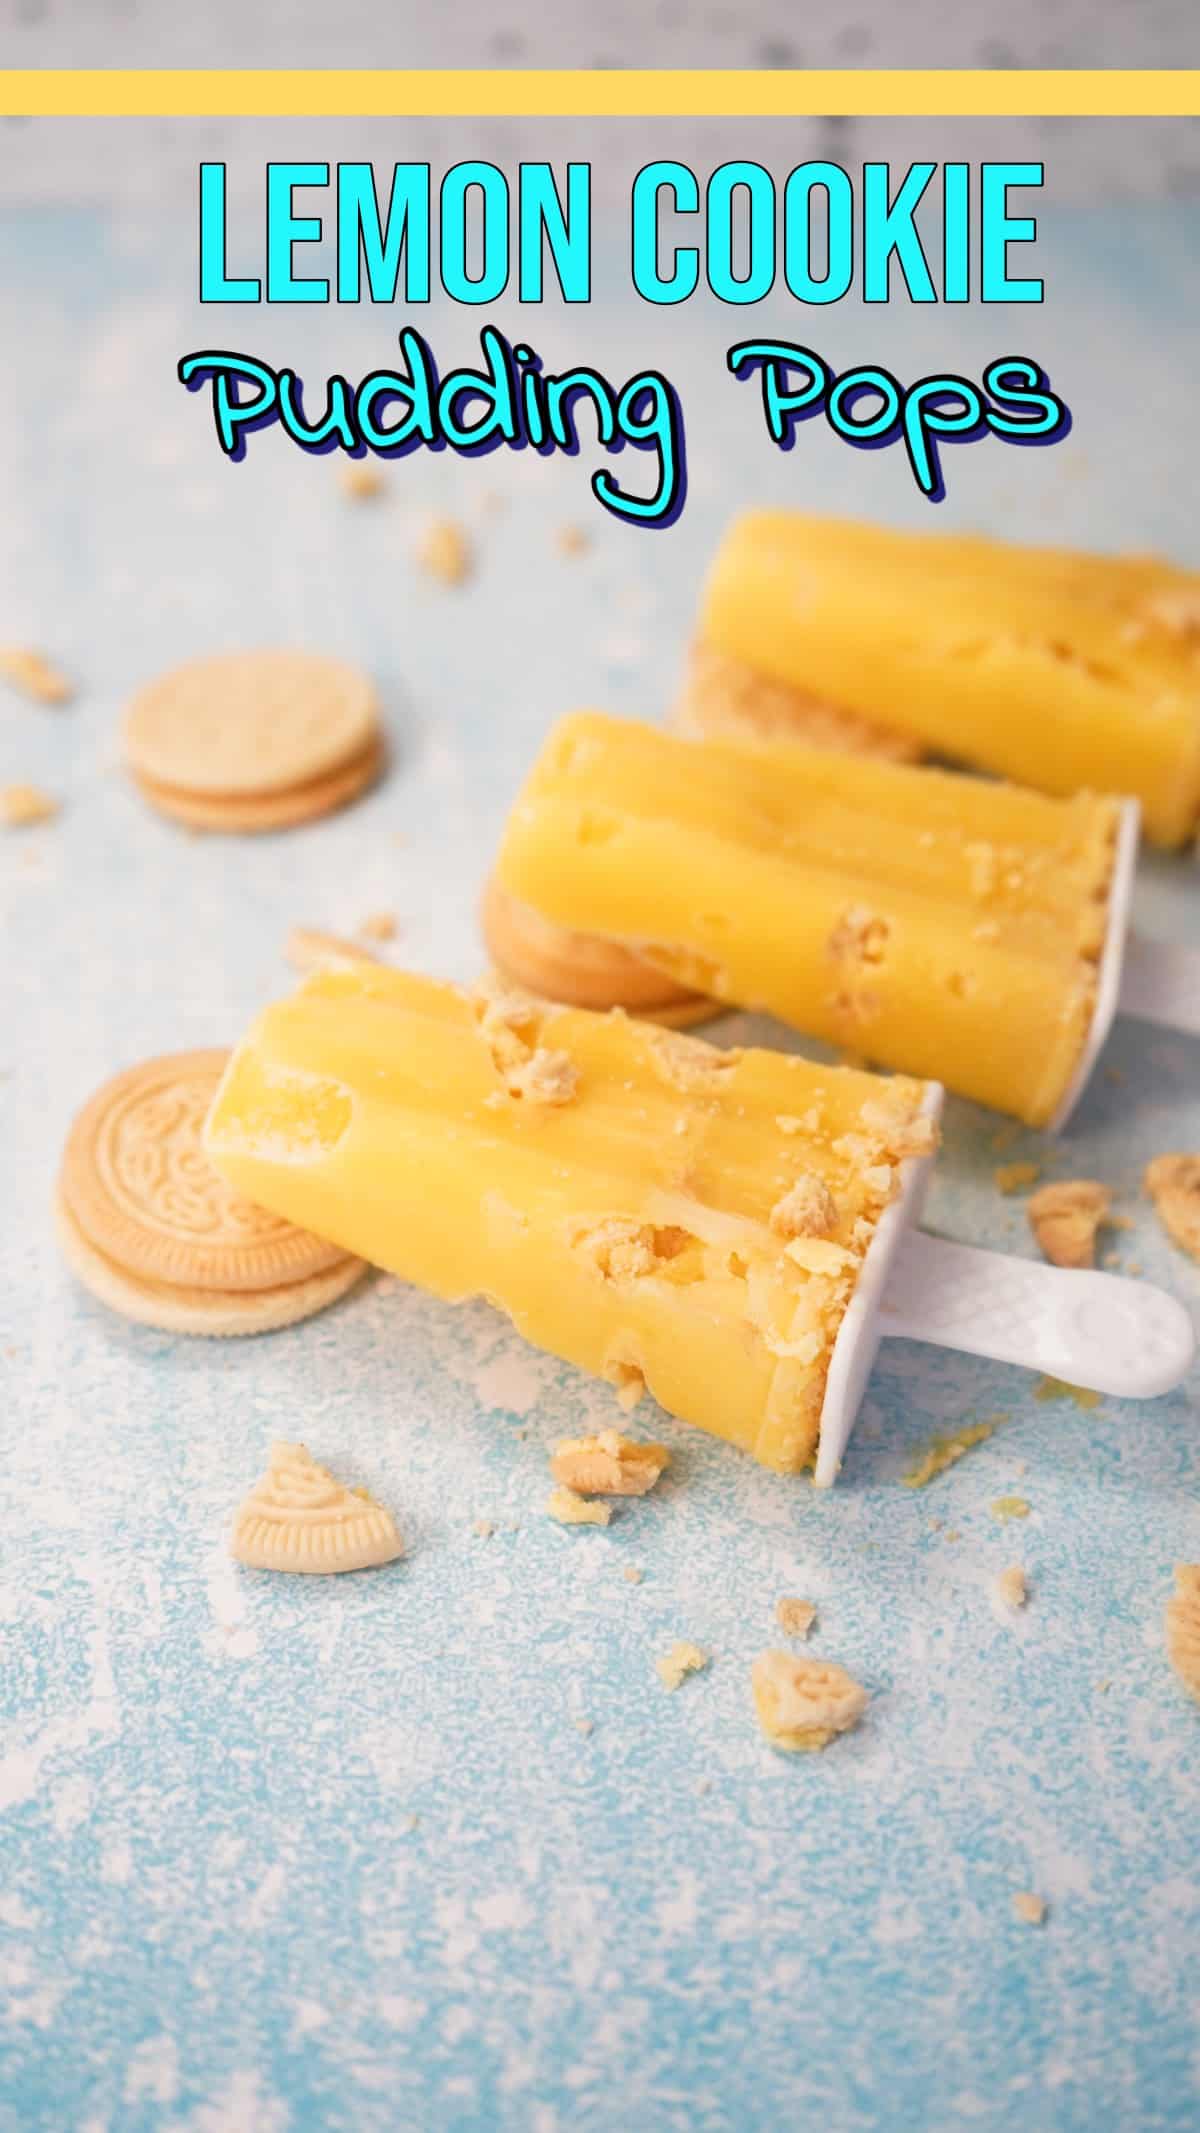 Lemon Cookie Pudding Pops with Title